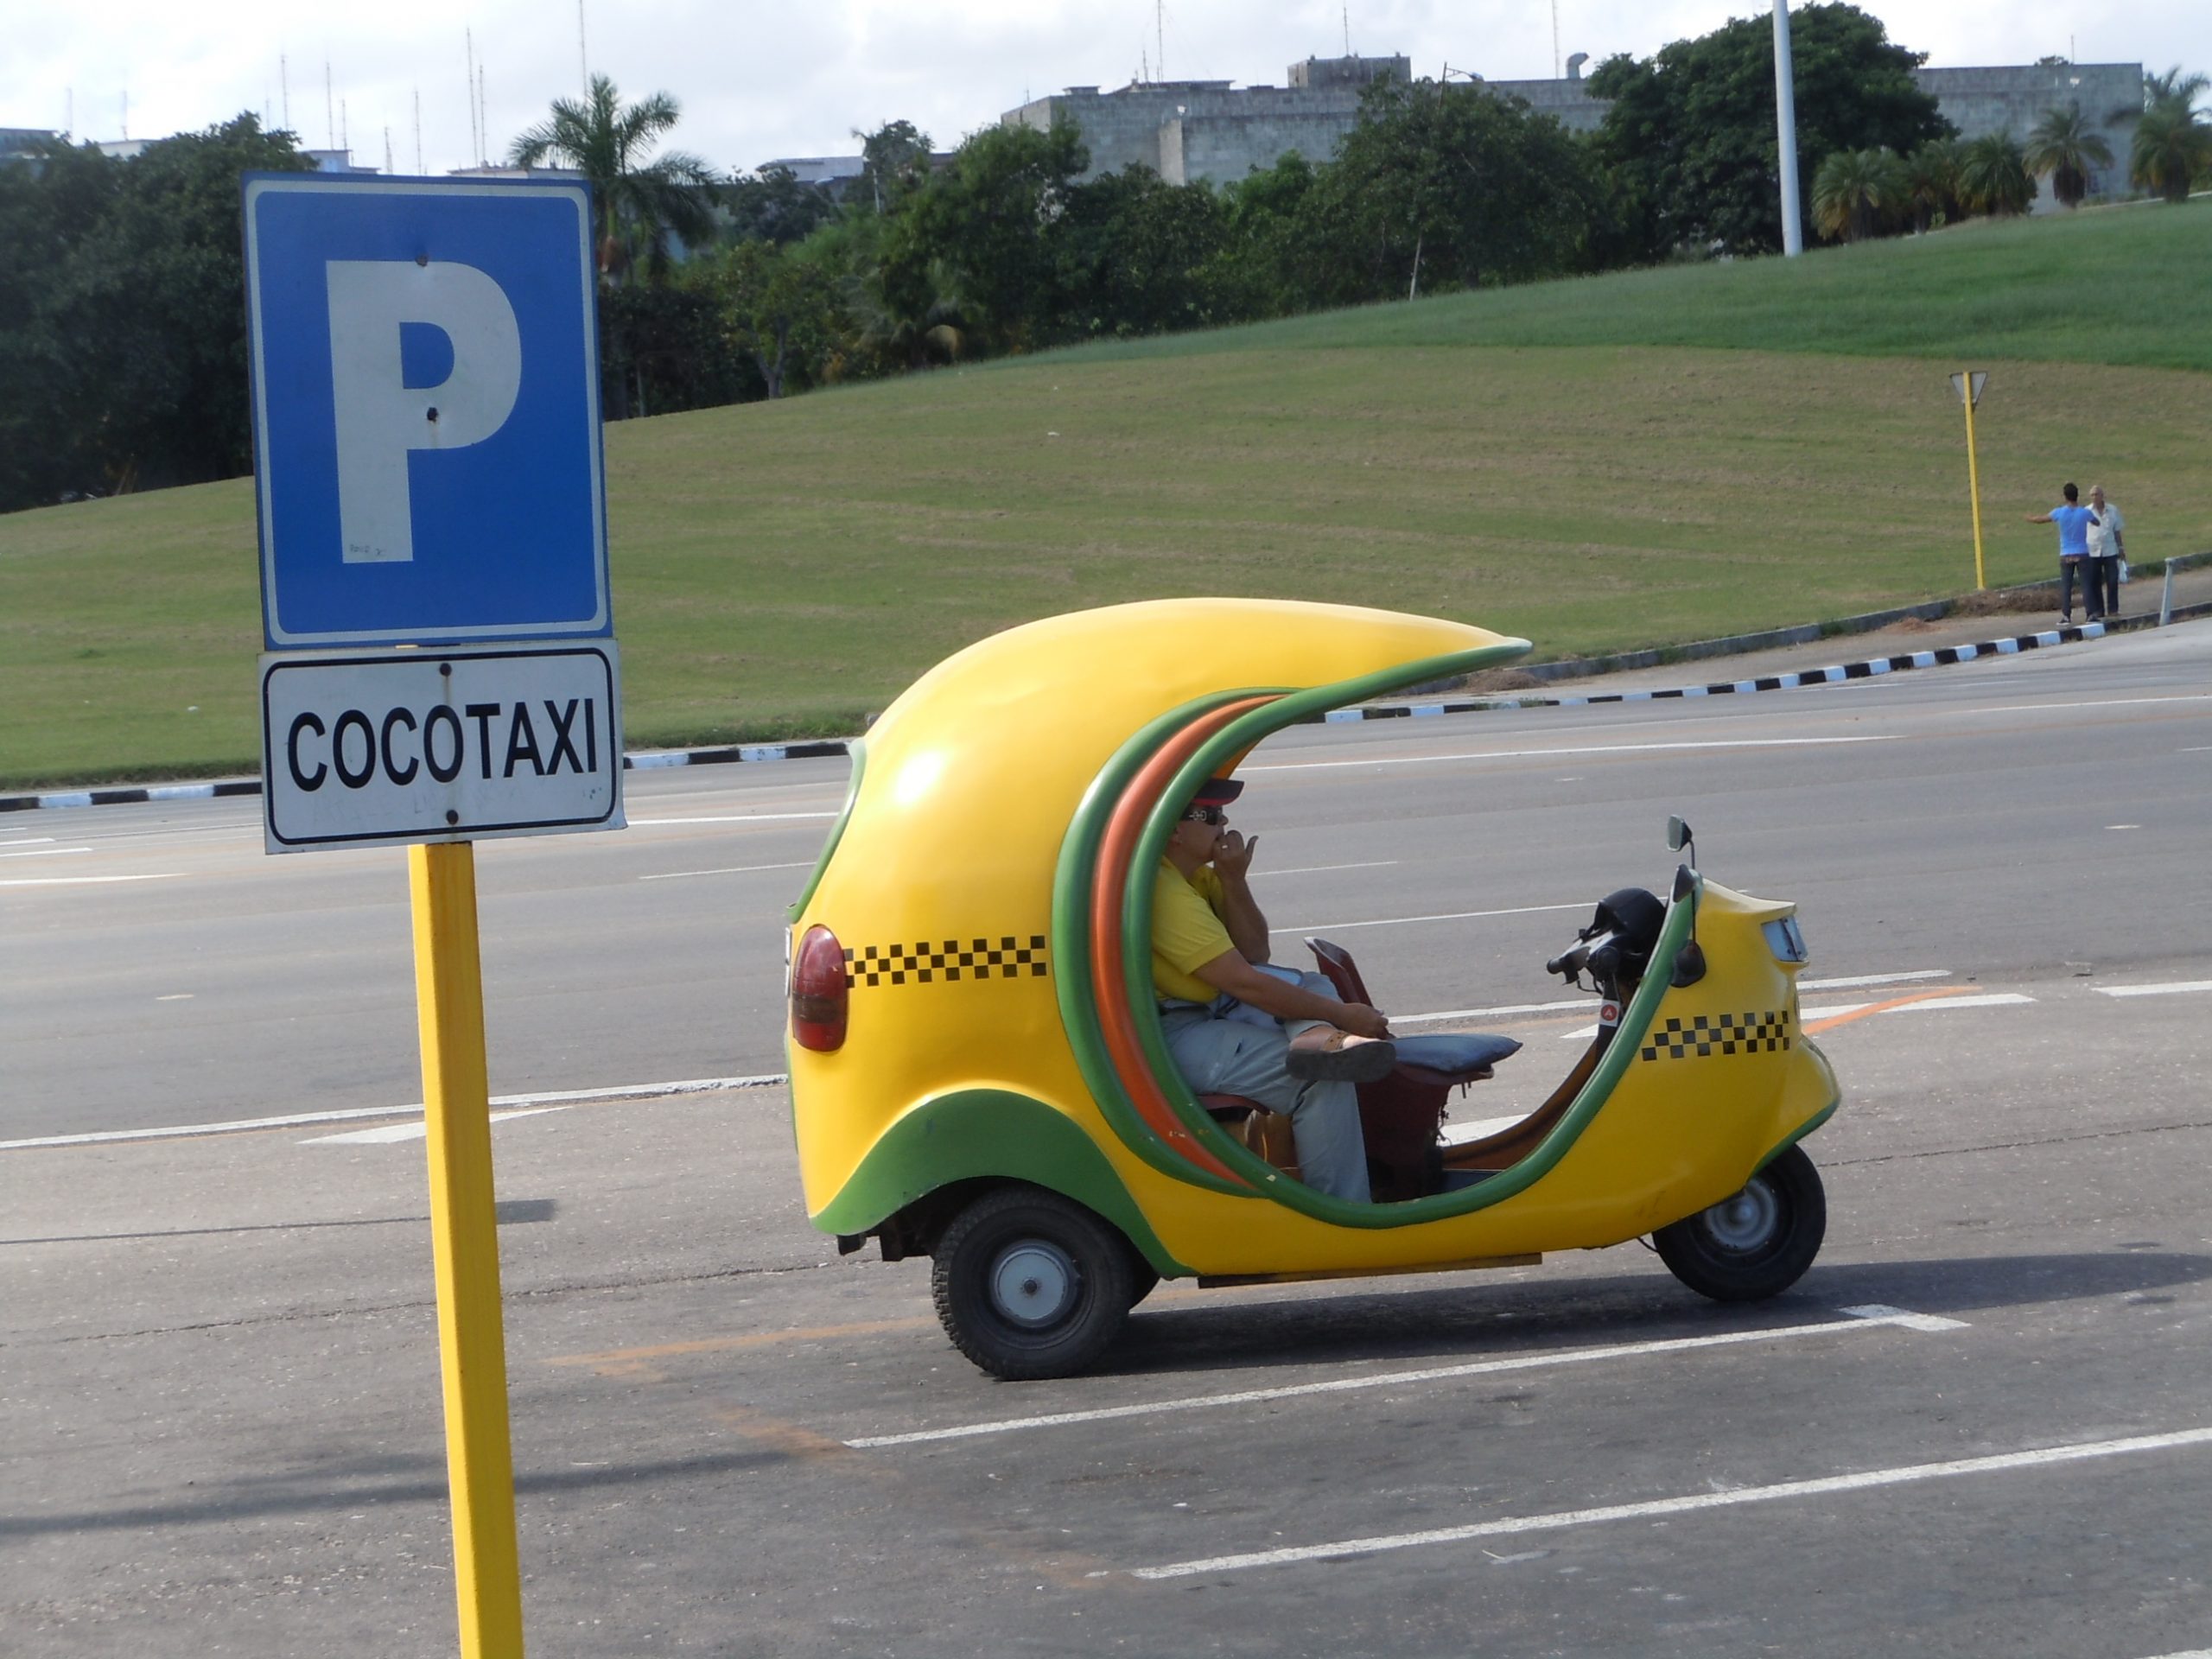 Enjoy a ride in a cocotaxi...equal parts fun and terrifying!